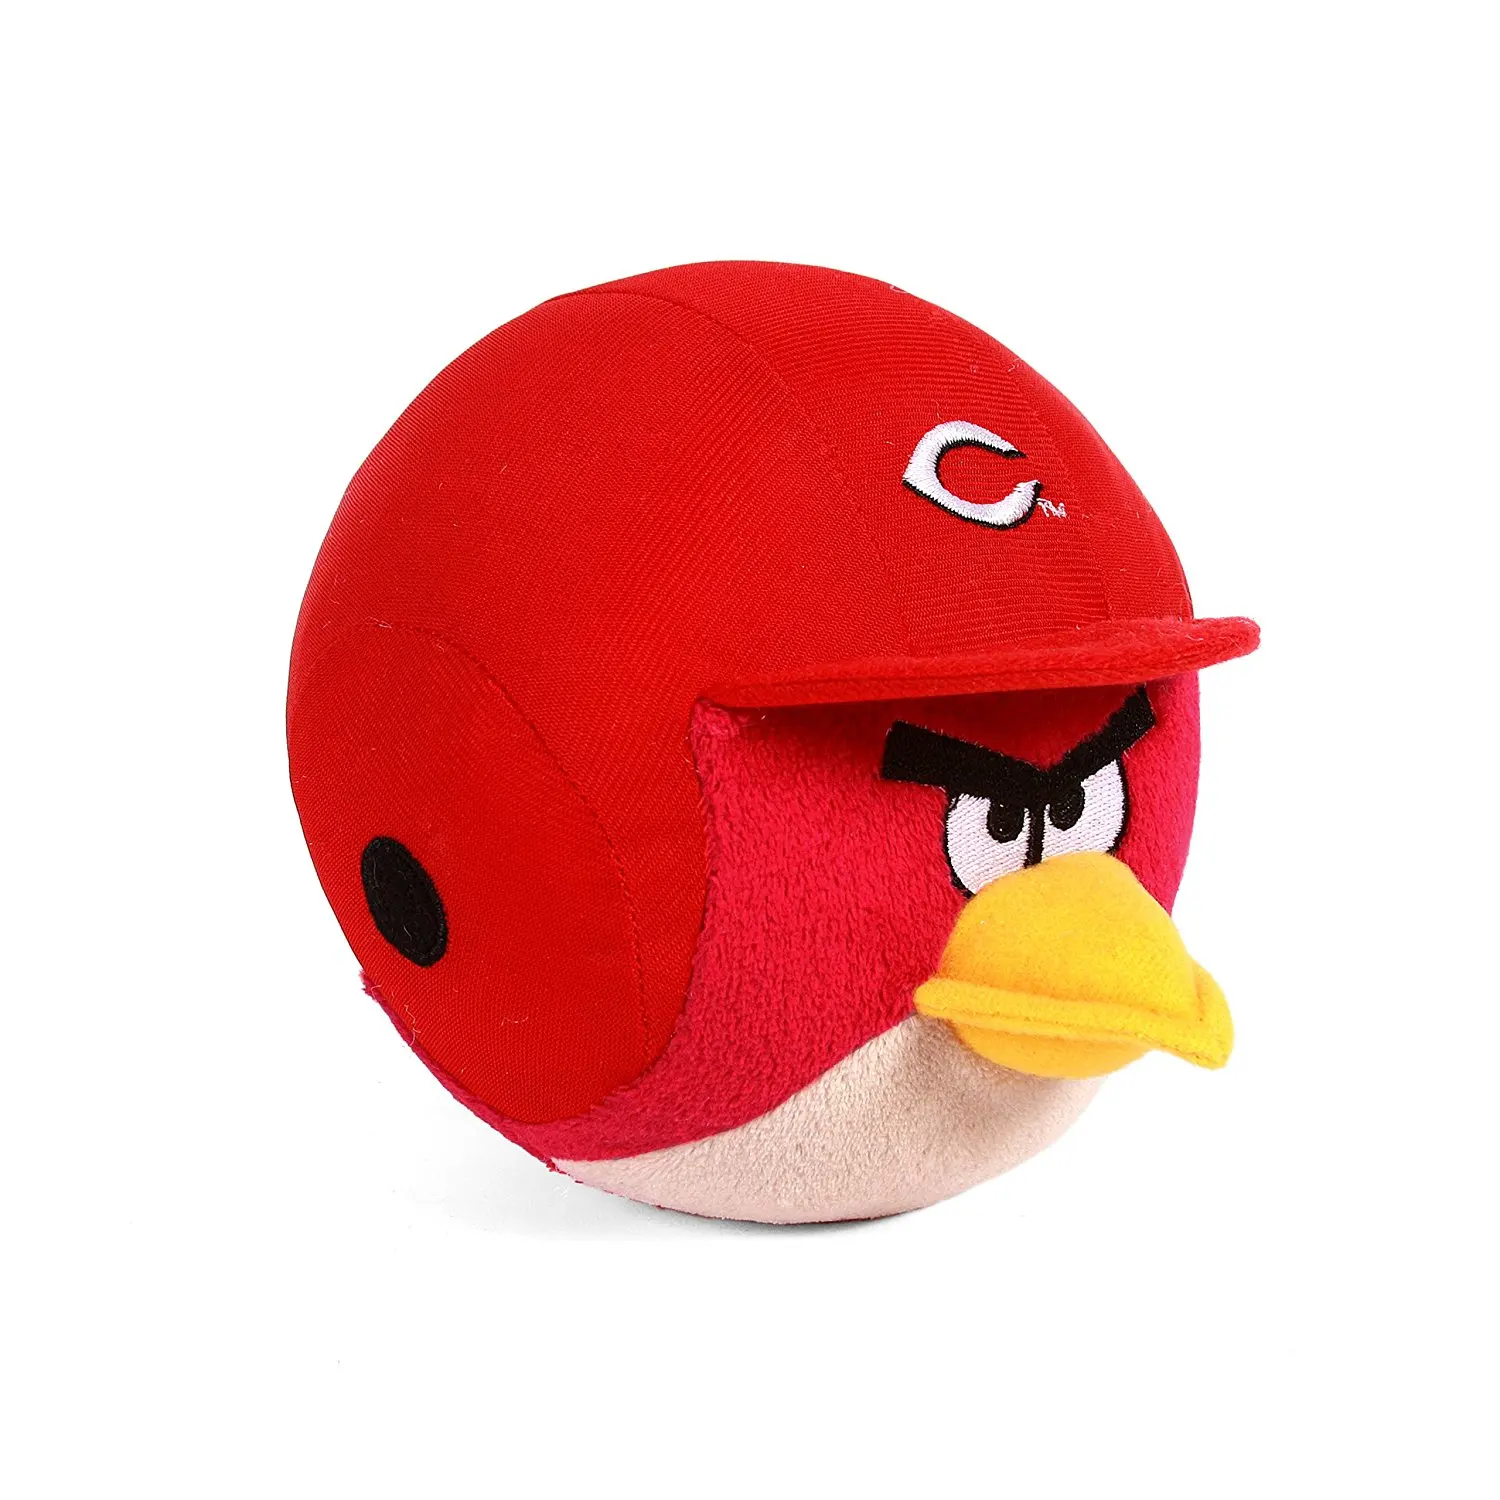 Angry Birds 16 Plush Red Bird Commonwealth Toy 91205